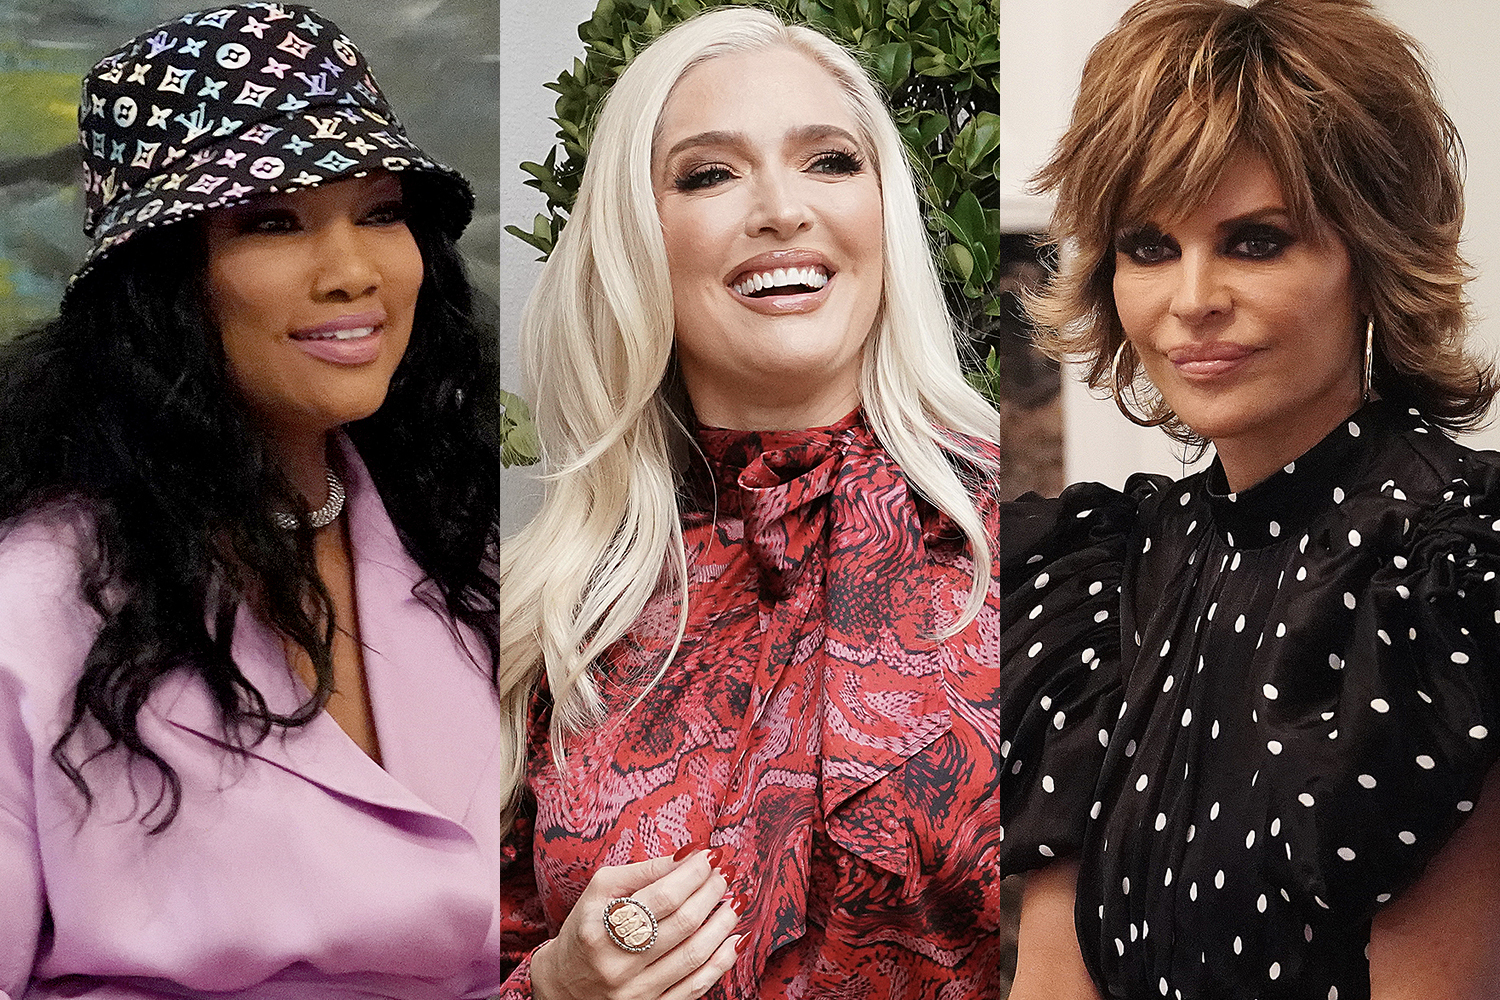 Garcelle Beauvais smiling, Erika Jayne smiling wide, and Lisa Rinna serious in multiple scenes from 'RHOBH'